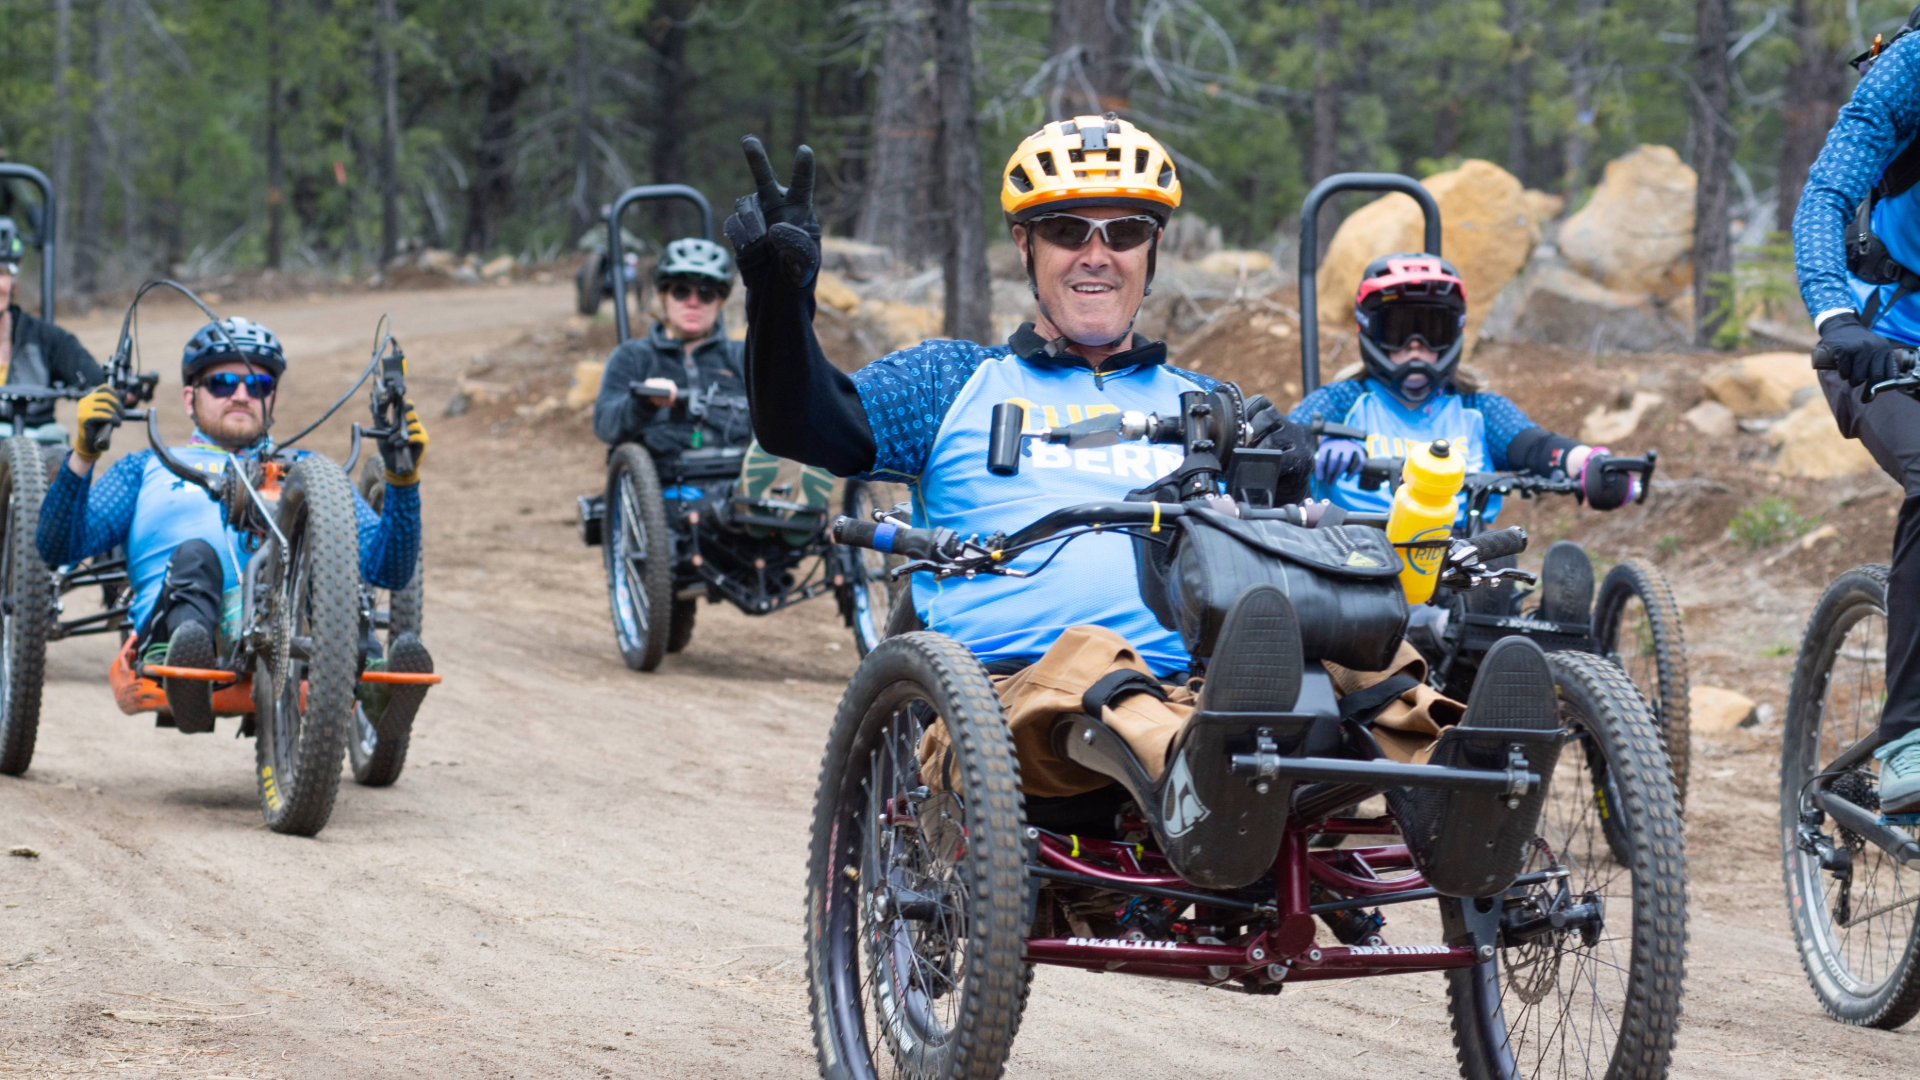 several athletes in aMTB handcycles going down the start of a trail, one athlete holds up a peace sign for the camera.